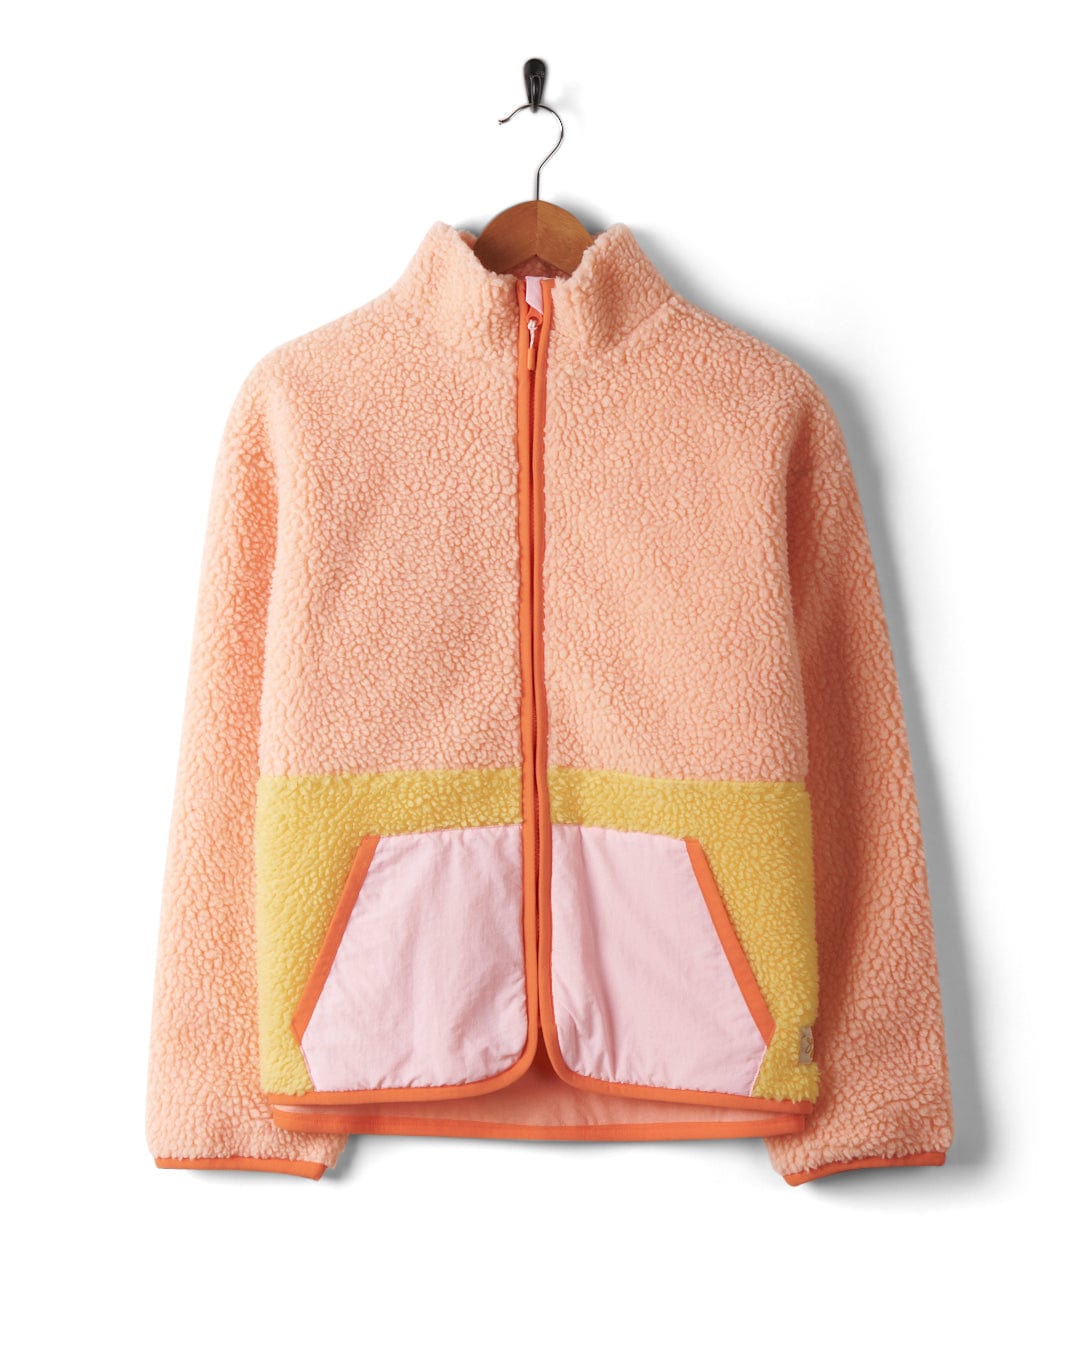 A girl's Emery Sunshine - Womens Sherpa Fleece - Coral jacket with contrast pockets, hanging on a hanger. (Brand Name: Saltrock)